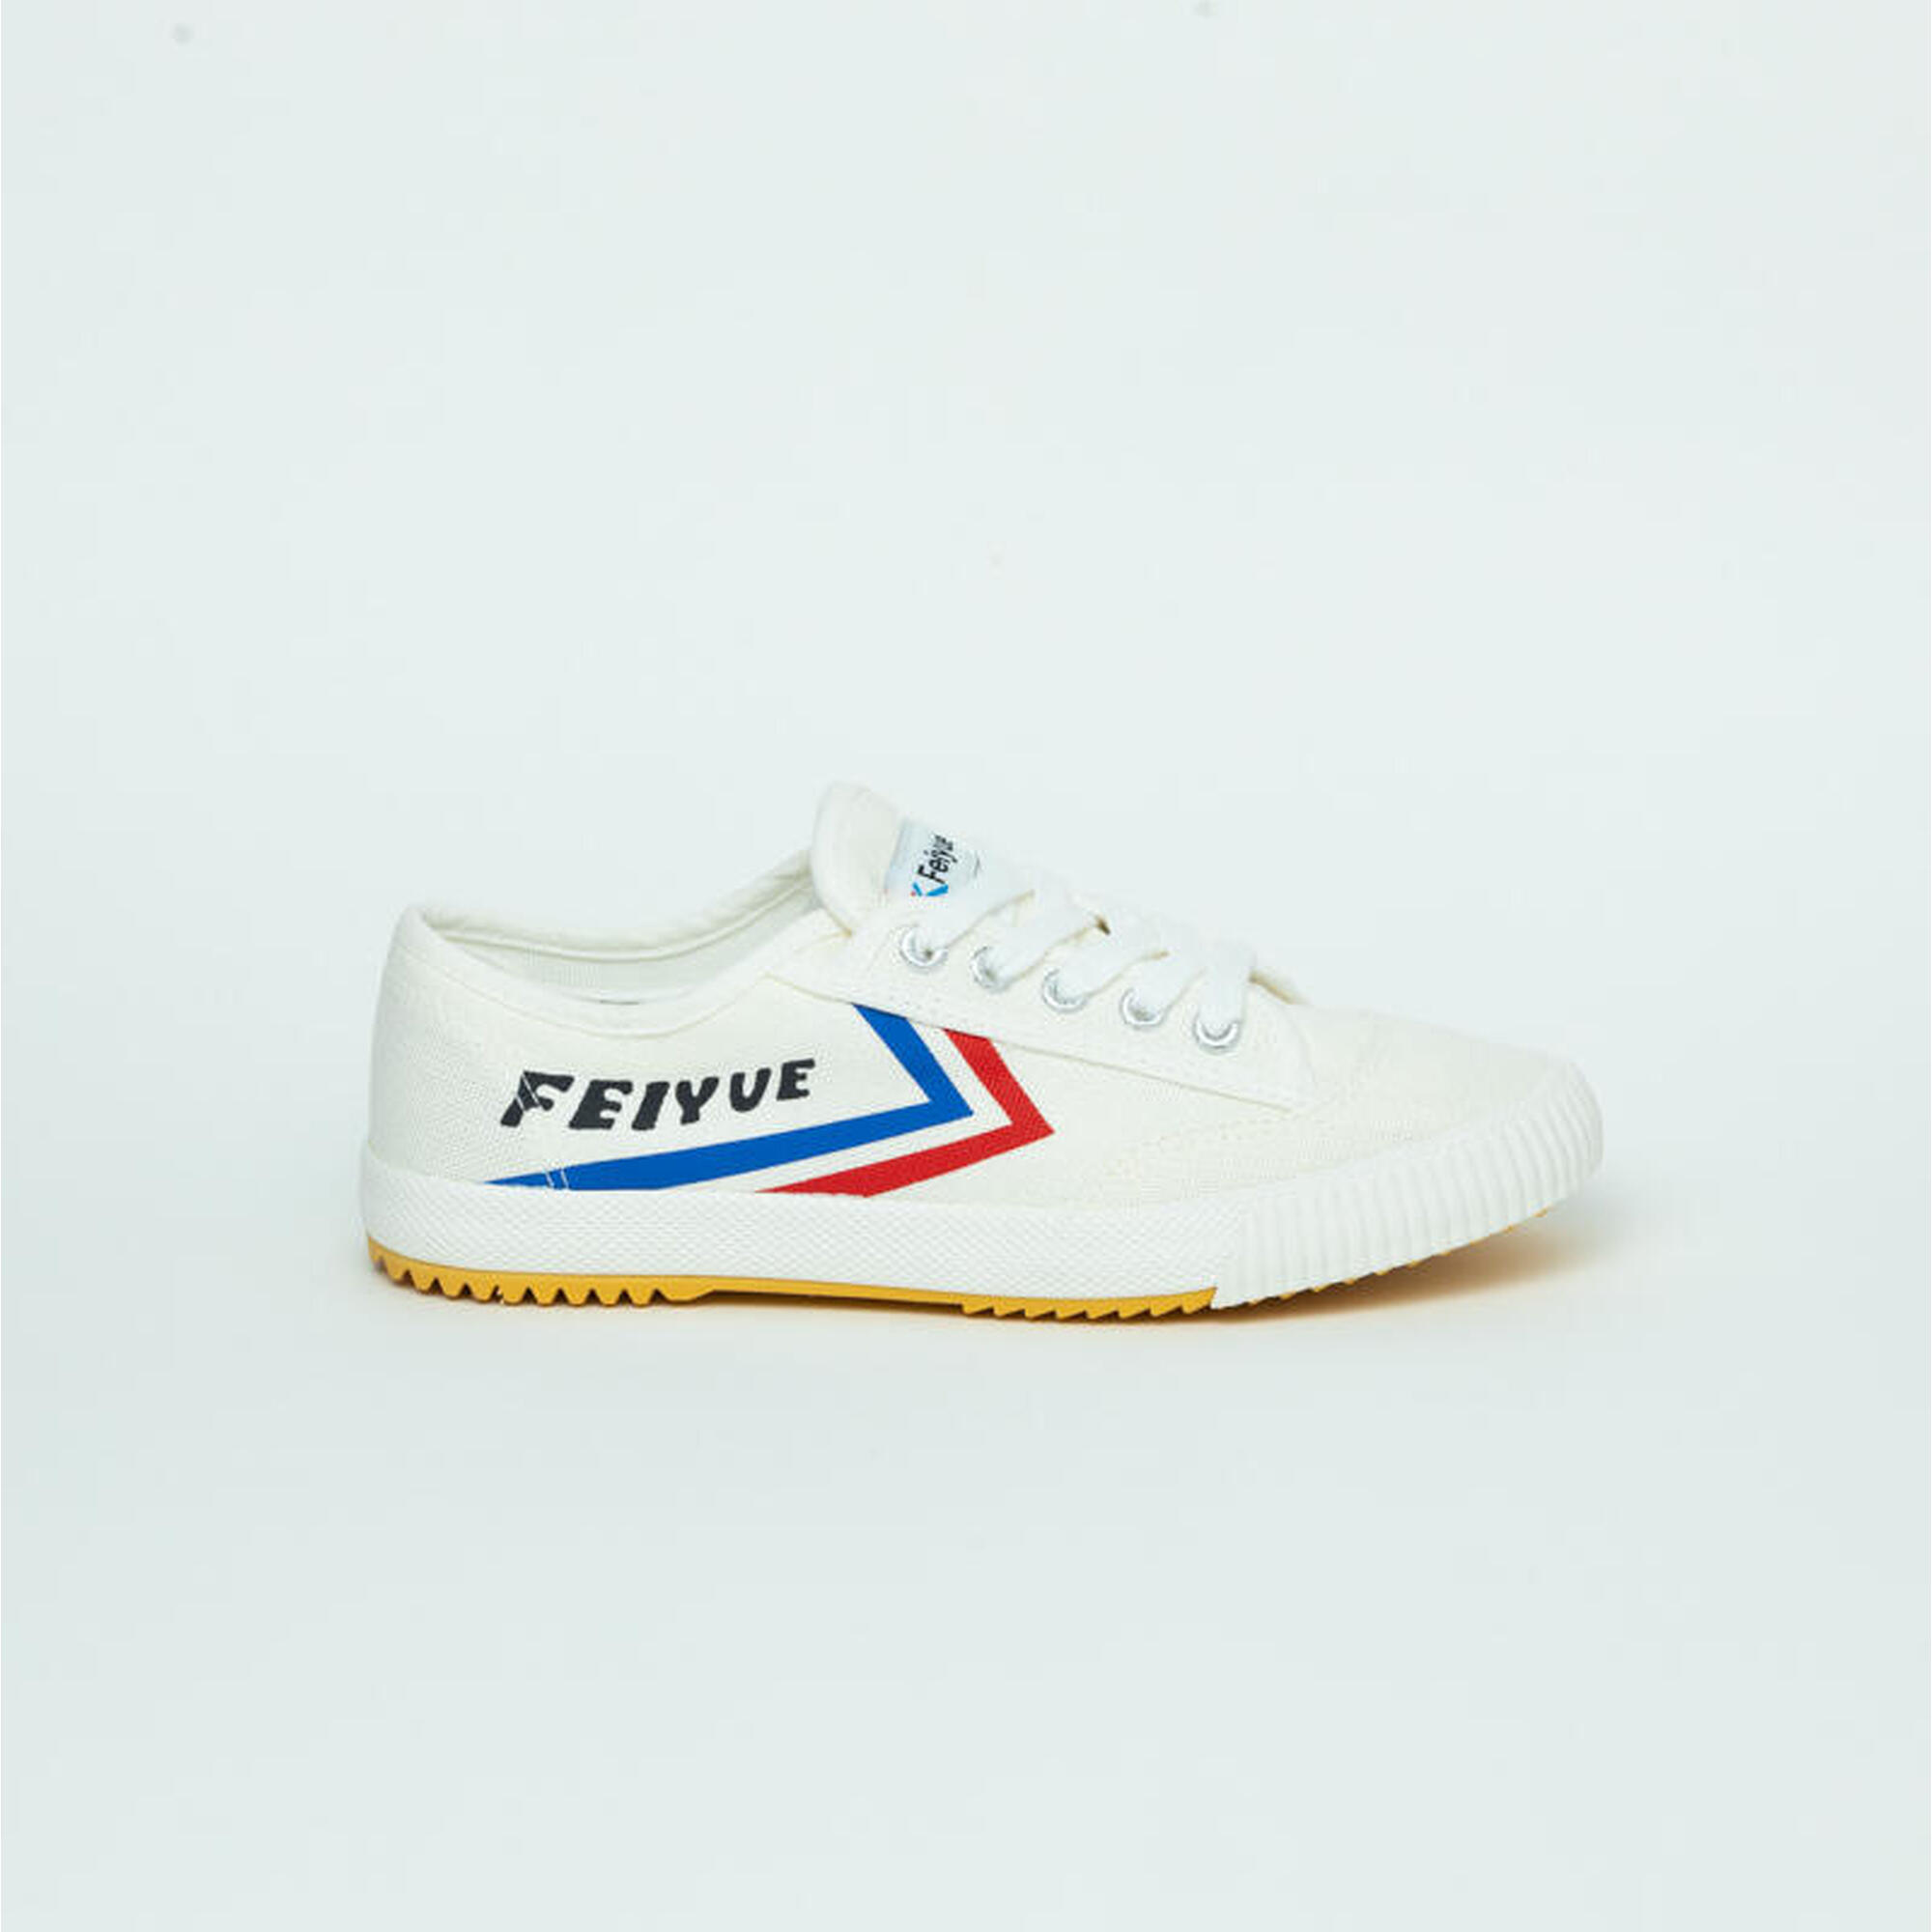 Drift White LO Canvas Shoes - White/Red